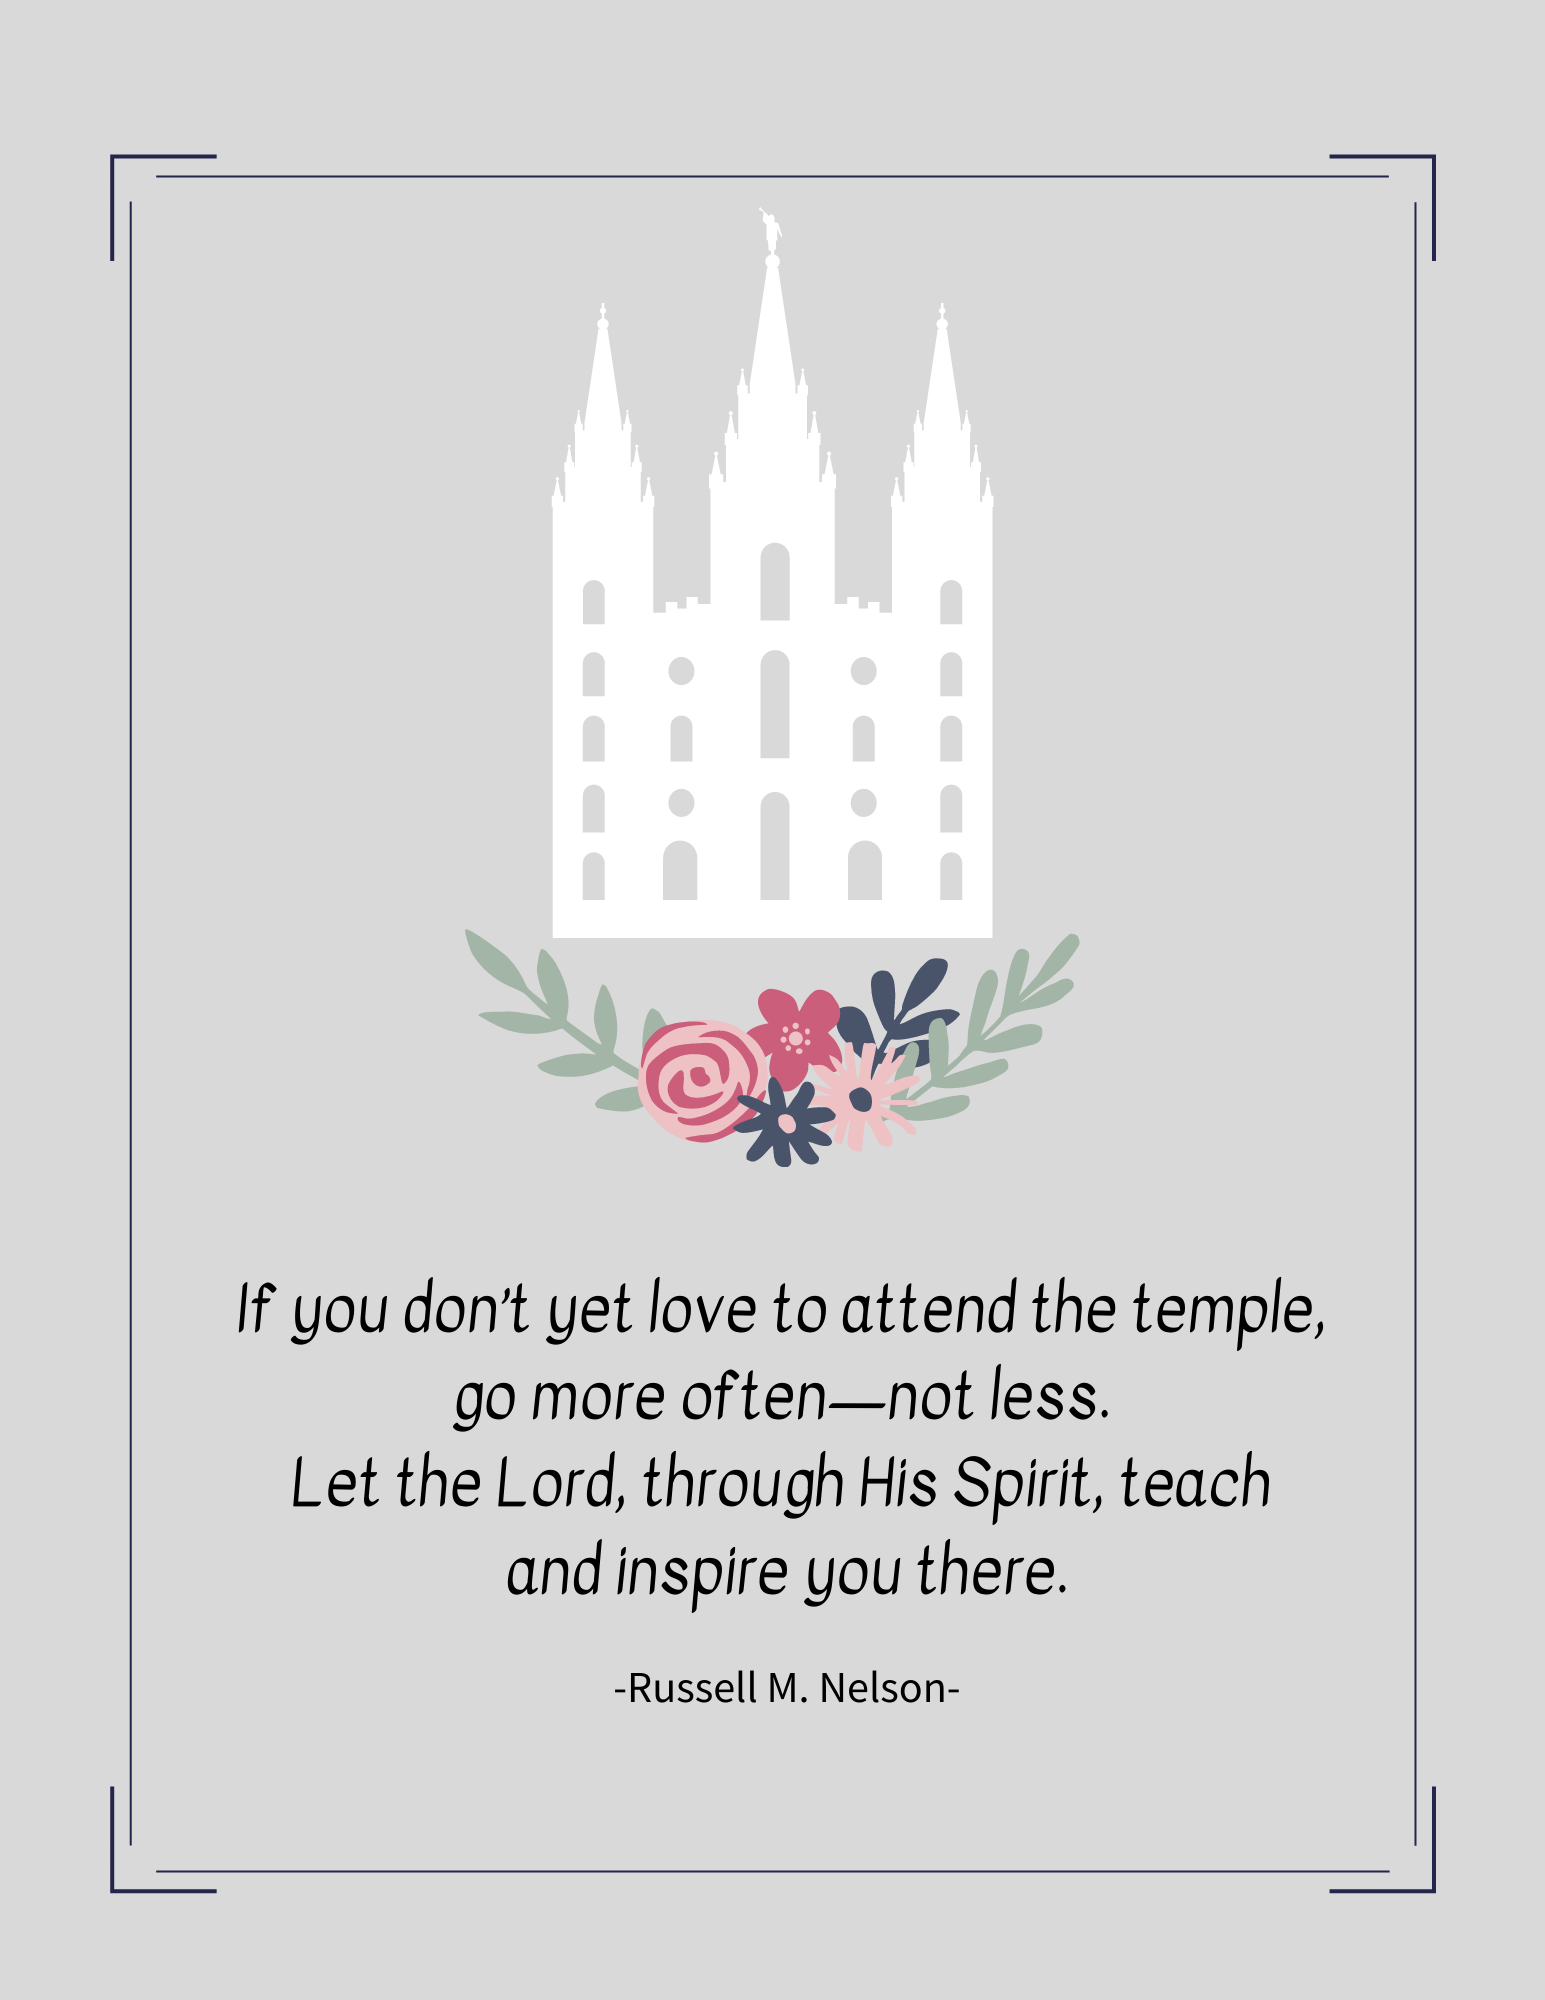 russell m nelson october general conference quote with salt lake city temple silhouette